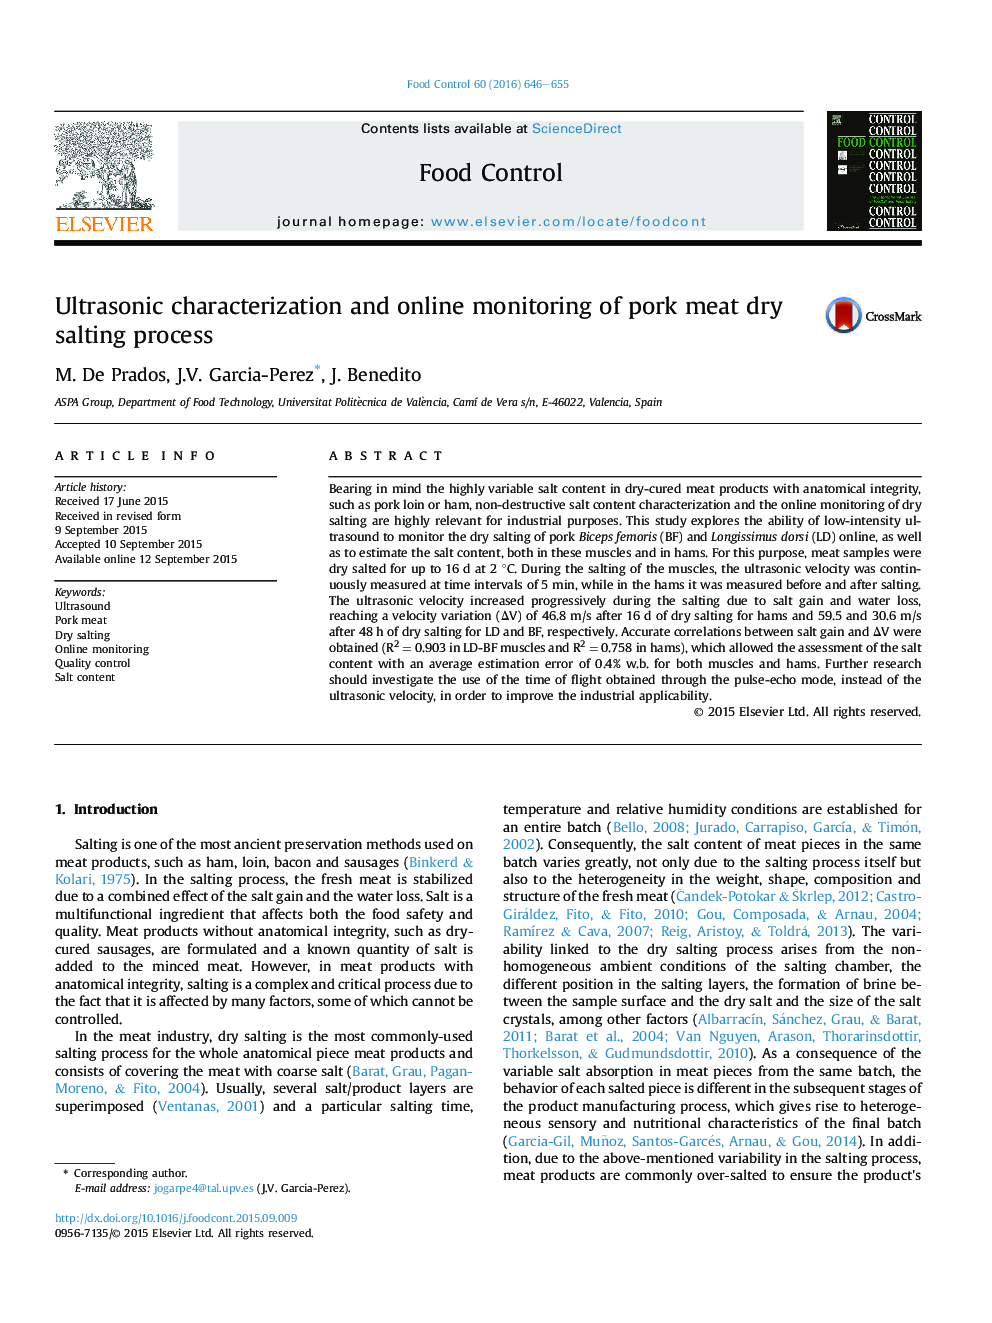 Ultrasonic characterization and online monitoring of pork meat dry salting process